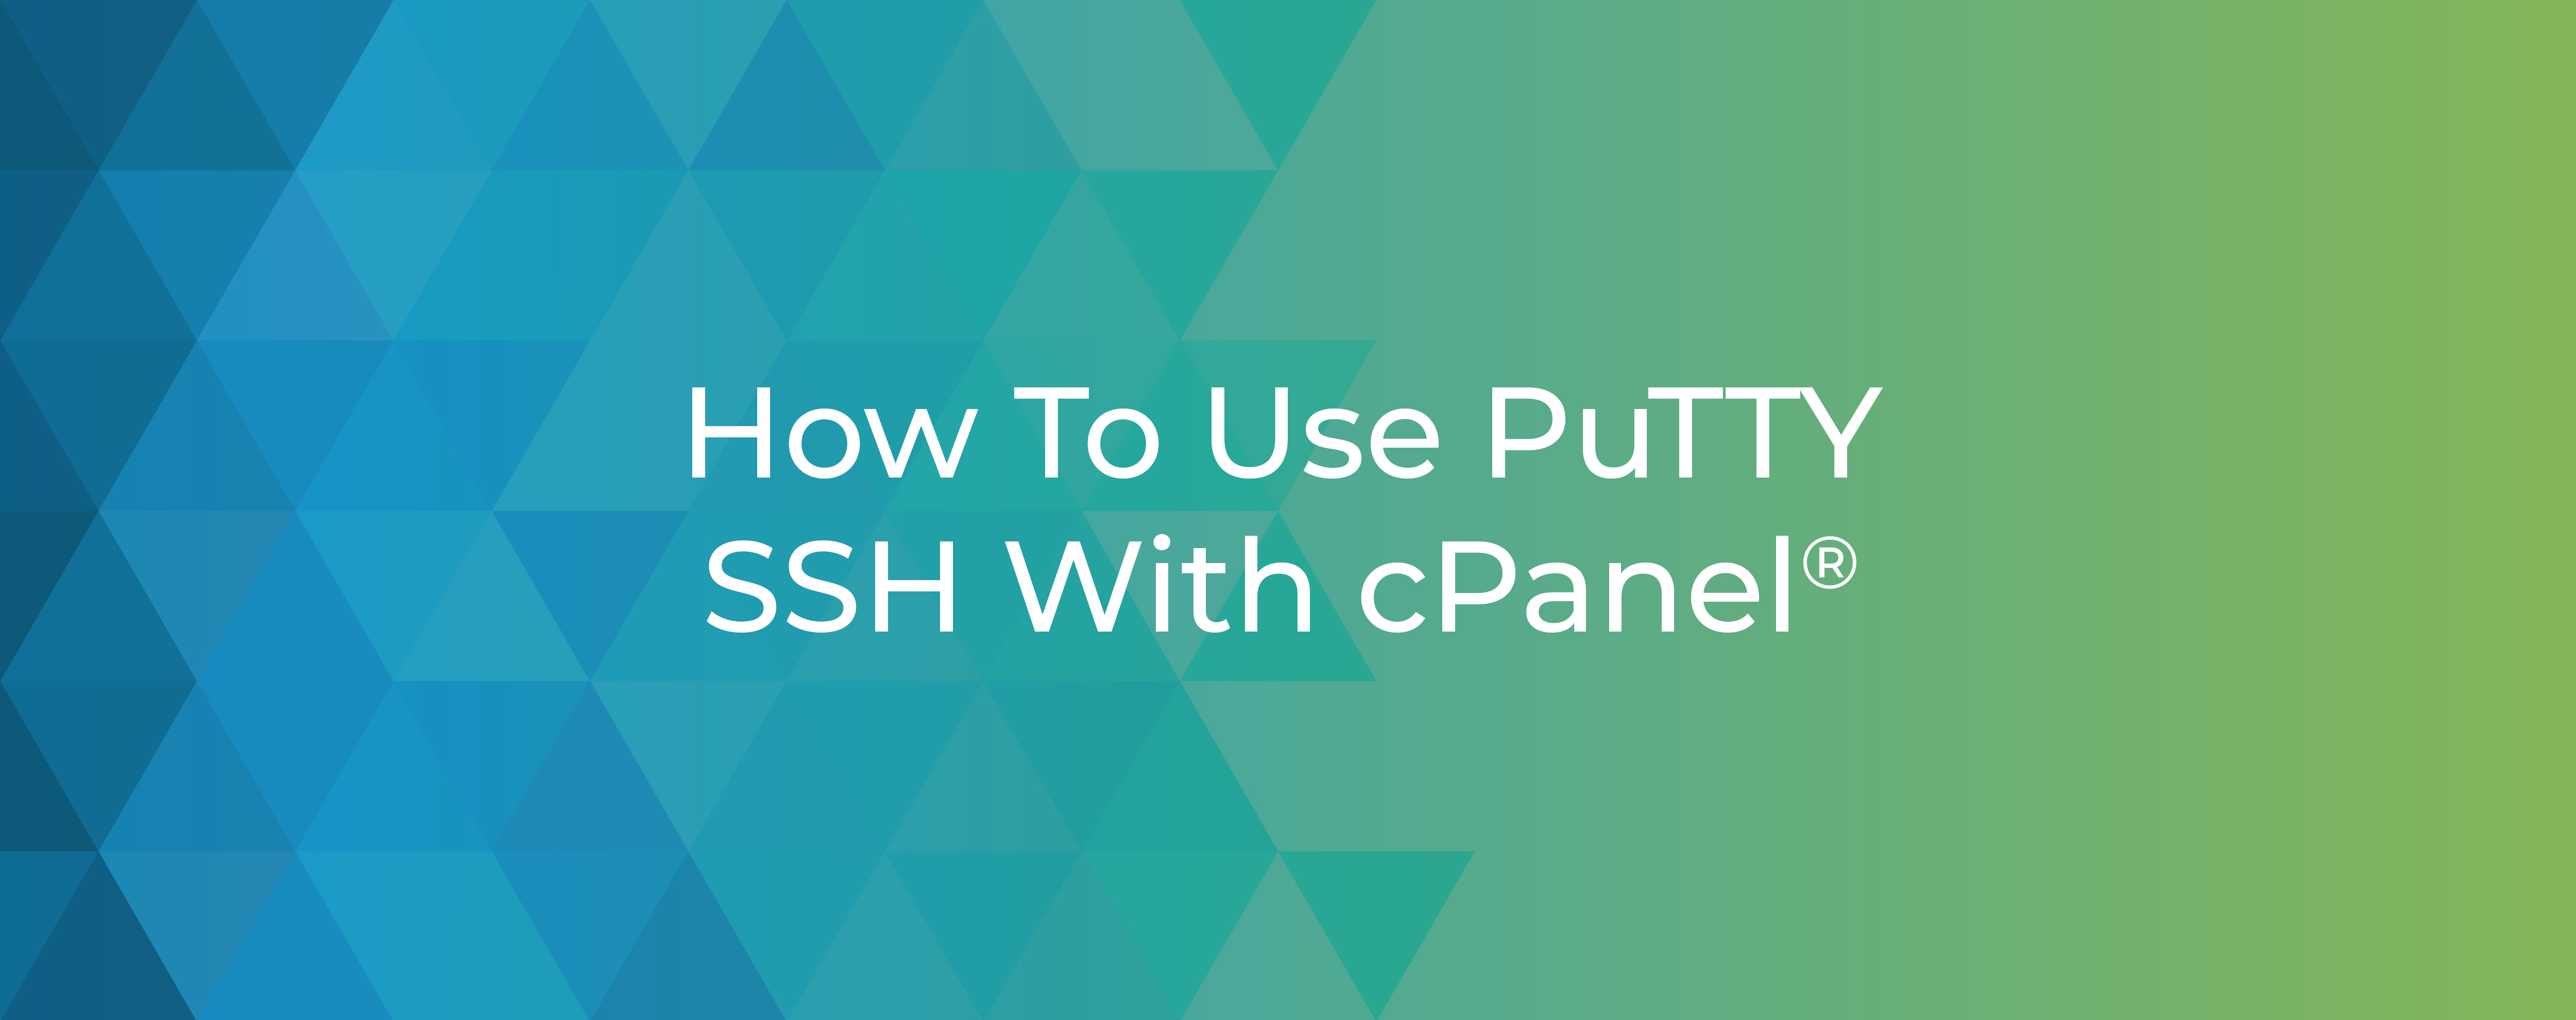 How To Use Putty SSH With cPanel